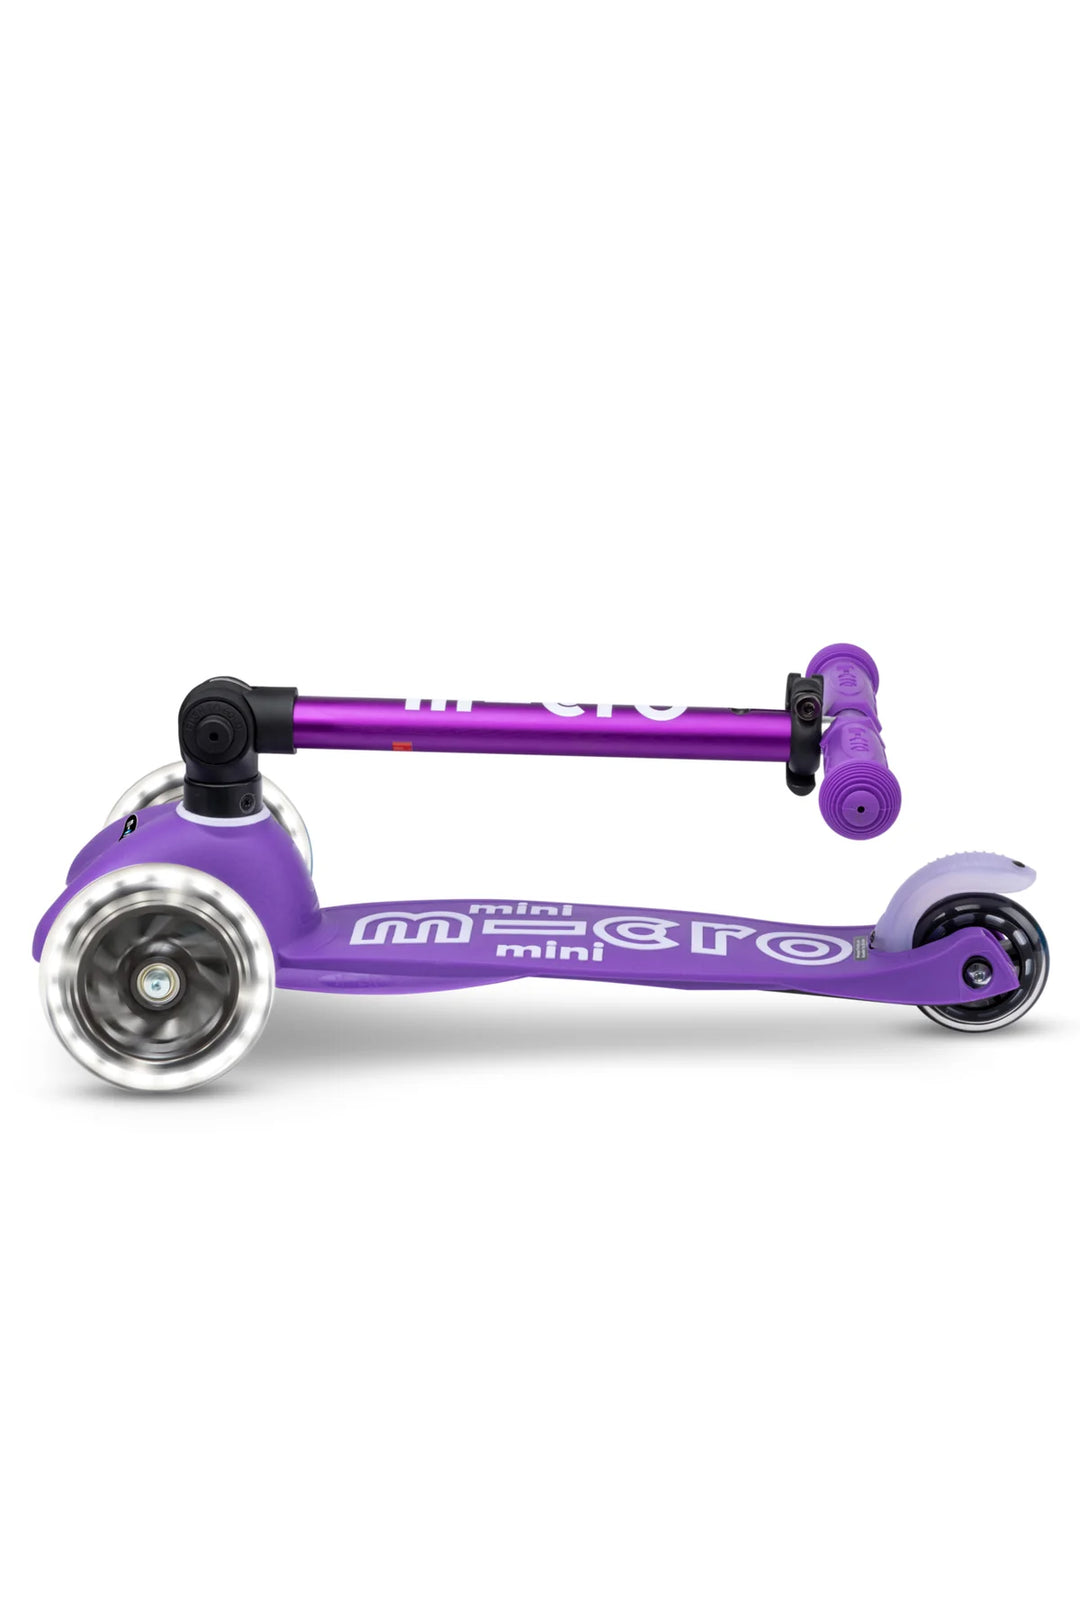 Micro Mini Deluxe Foldable LED Scooter - Purple - LOCAL PICK UP ONLY